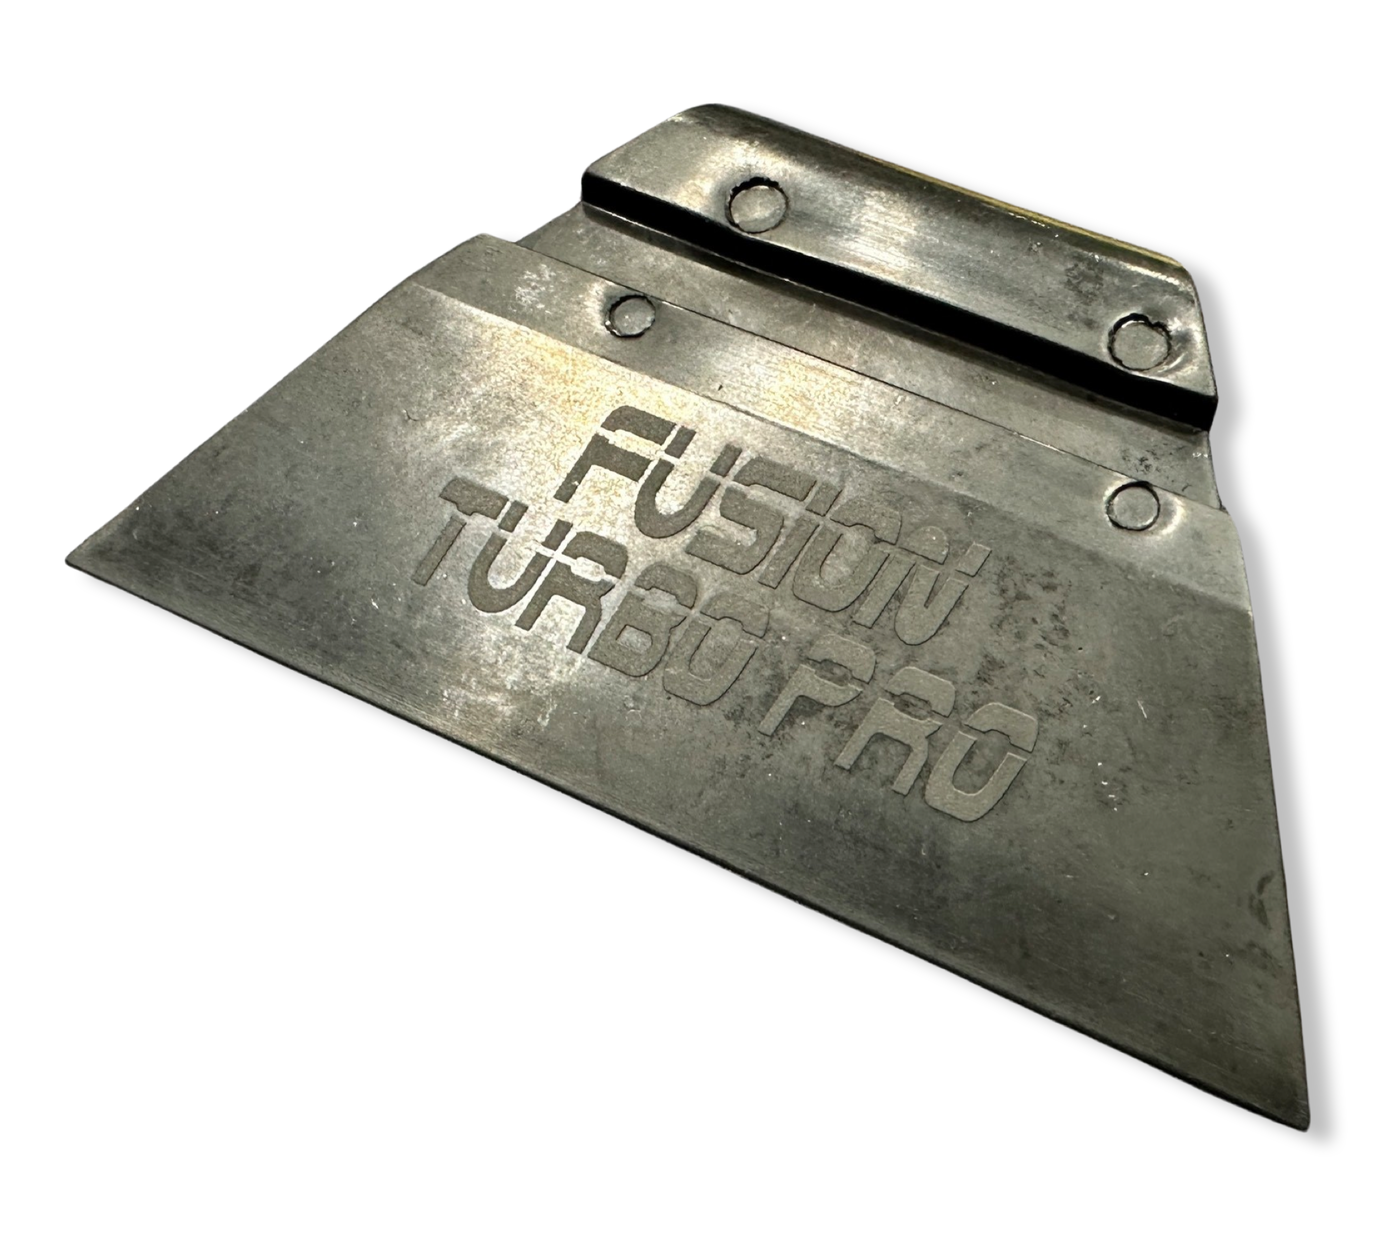 3.5" Turbo Squeegee by Fusion Tools